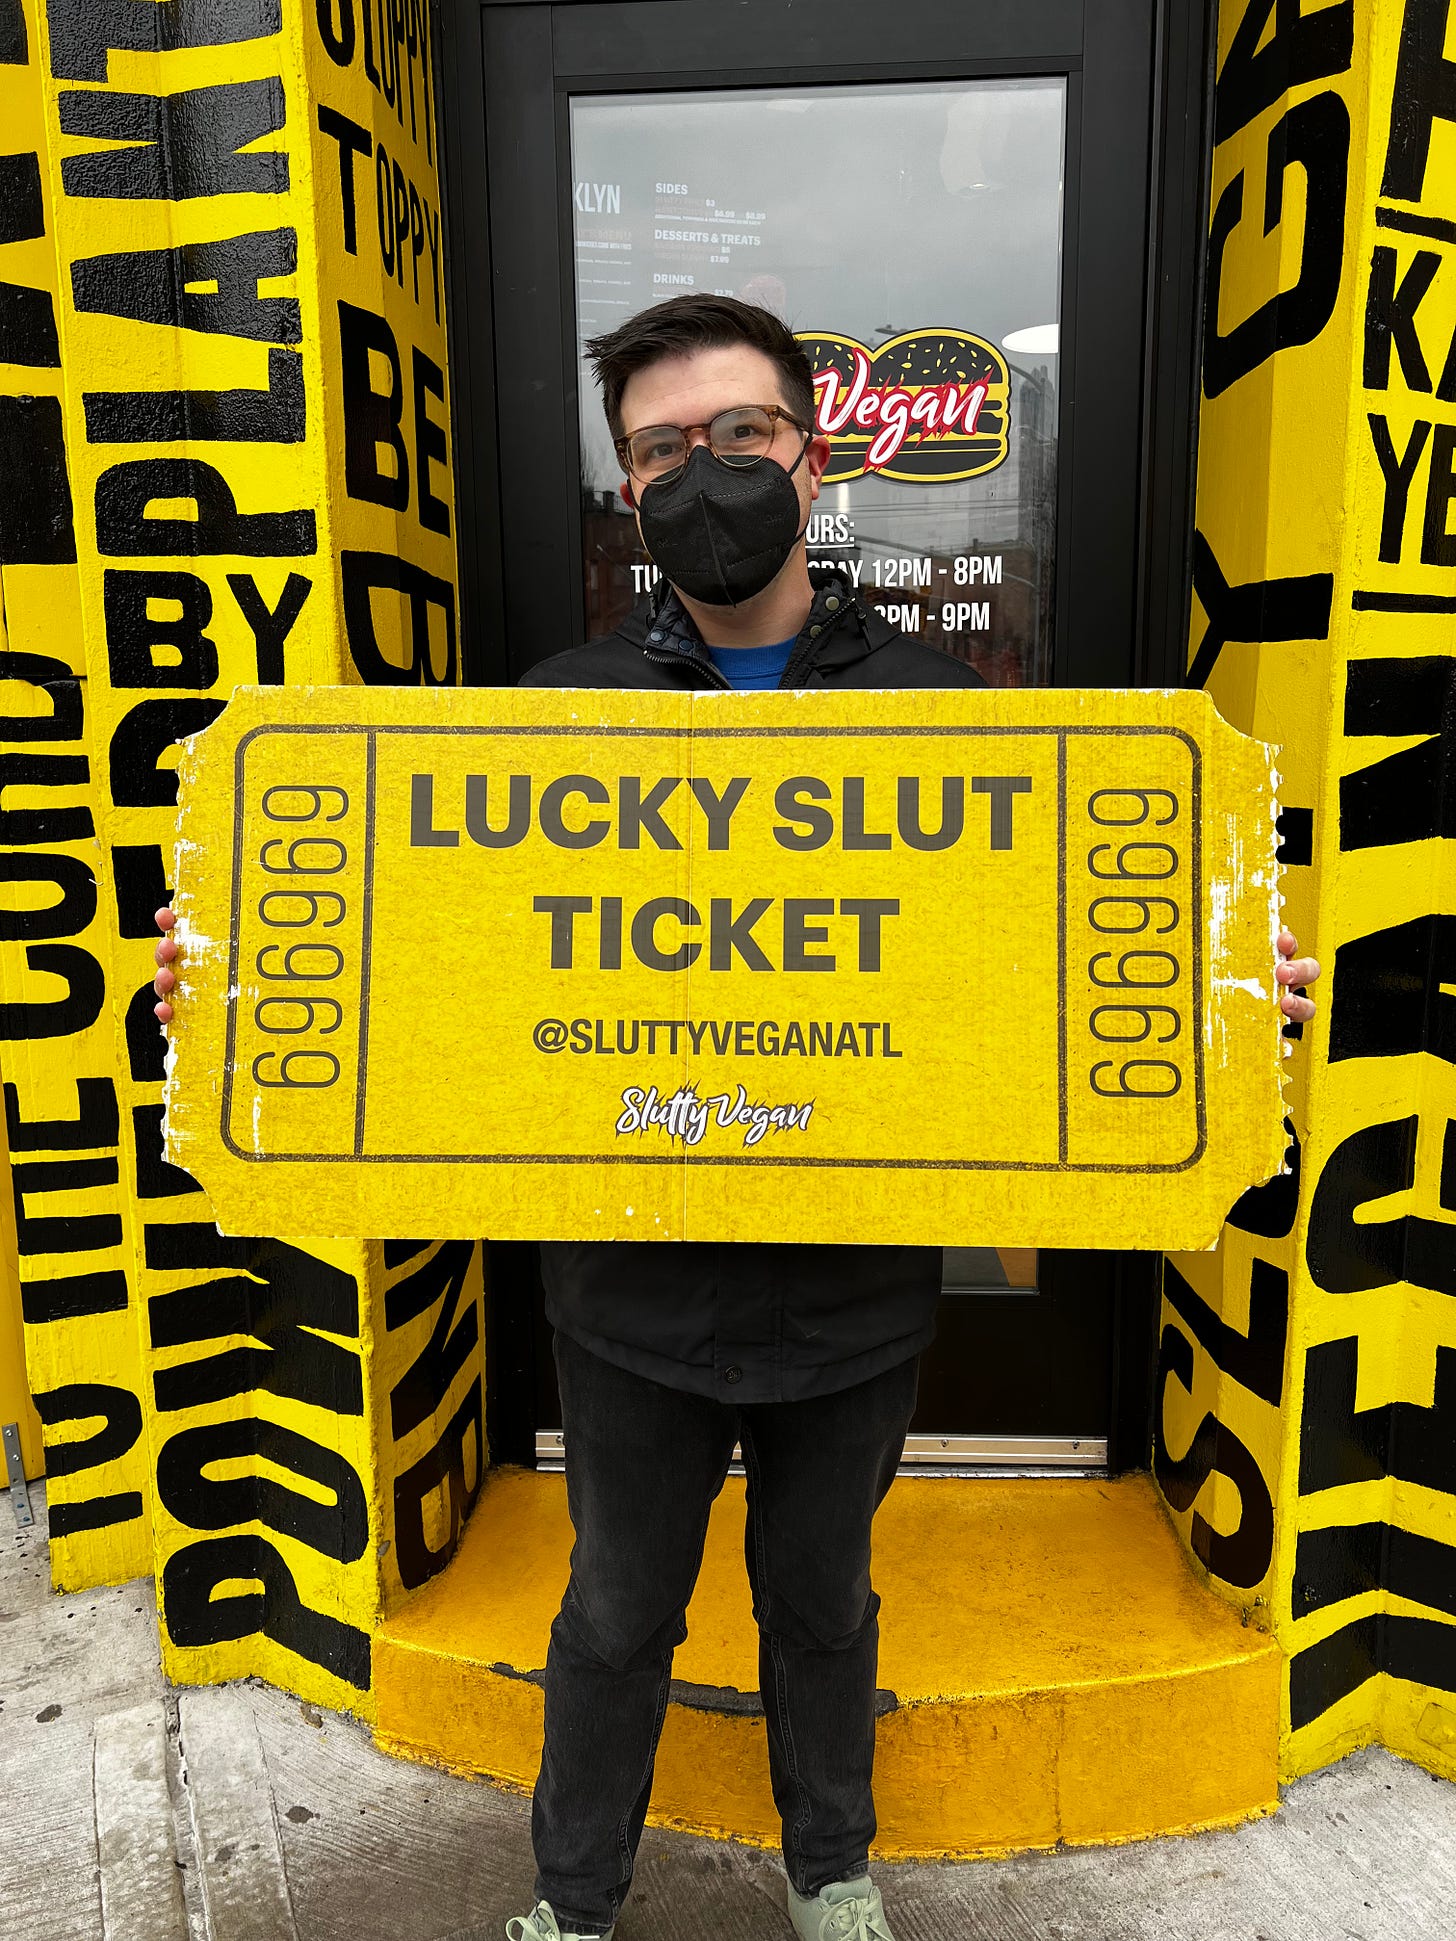 The author holding large yellow "Lucky Slut Ticket" in front of Slutty Vegan.